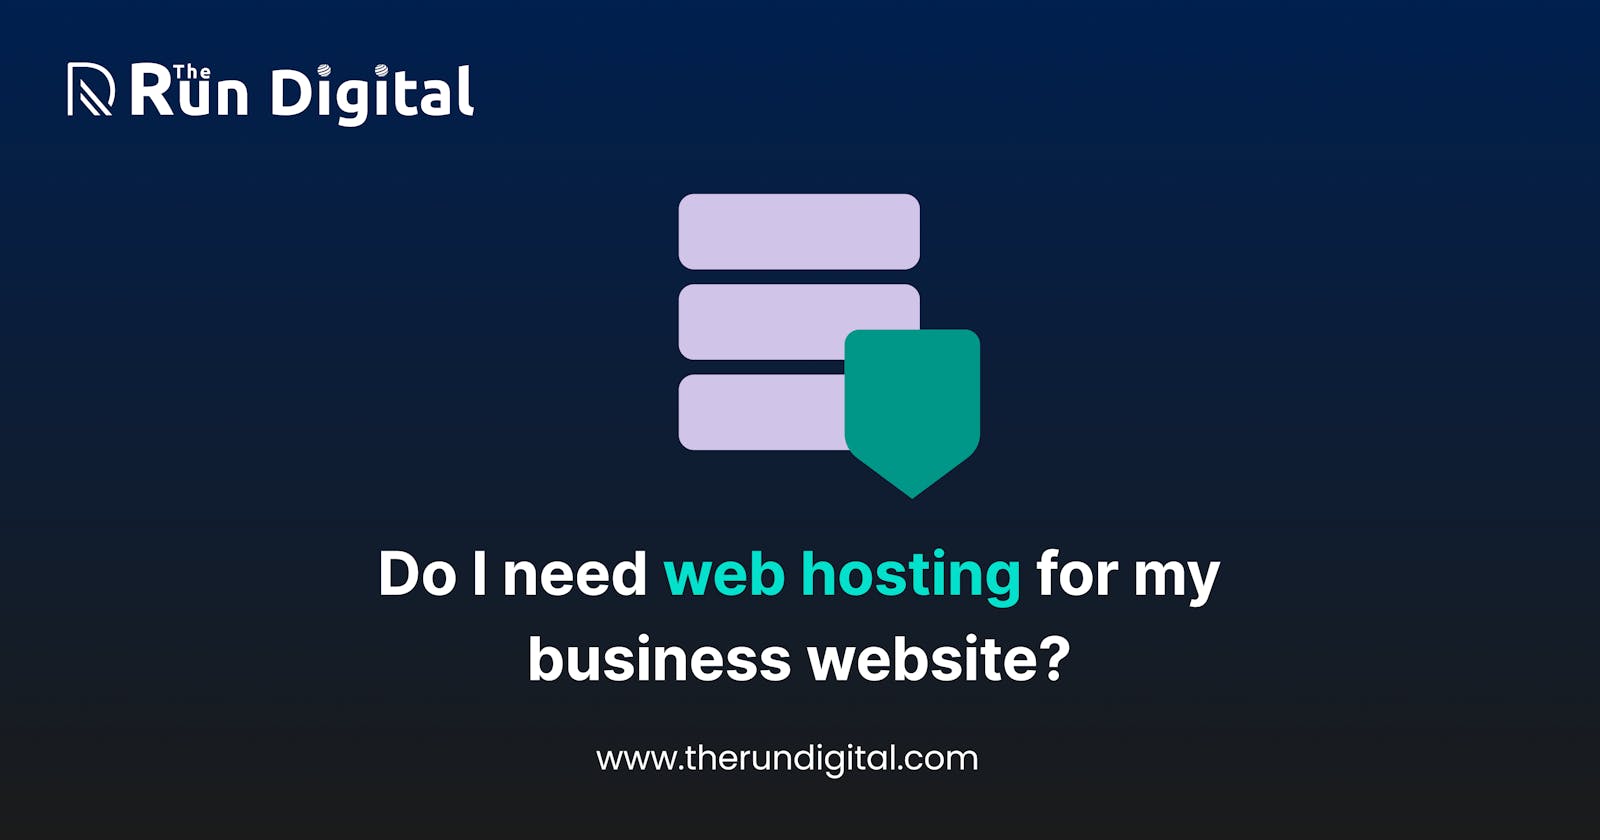 Non technical: Do I need a web hosting for my website?